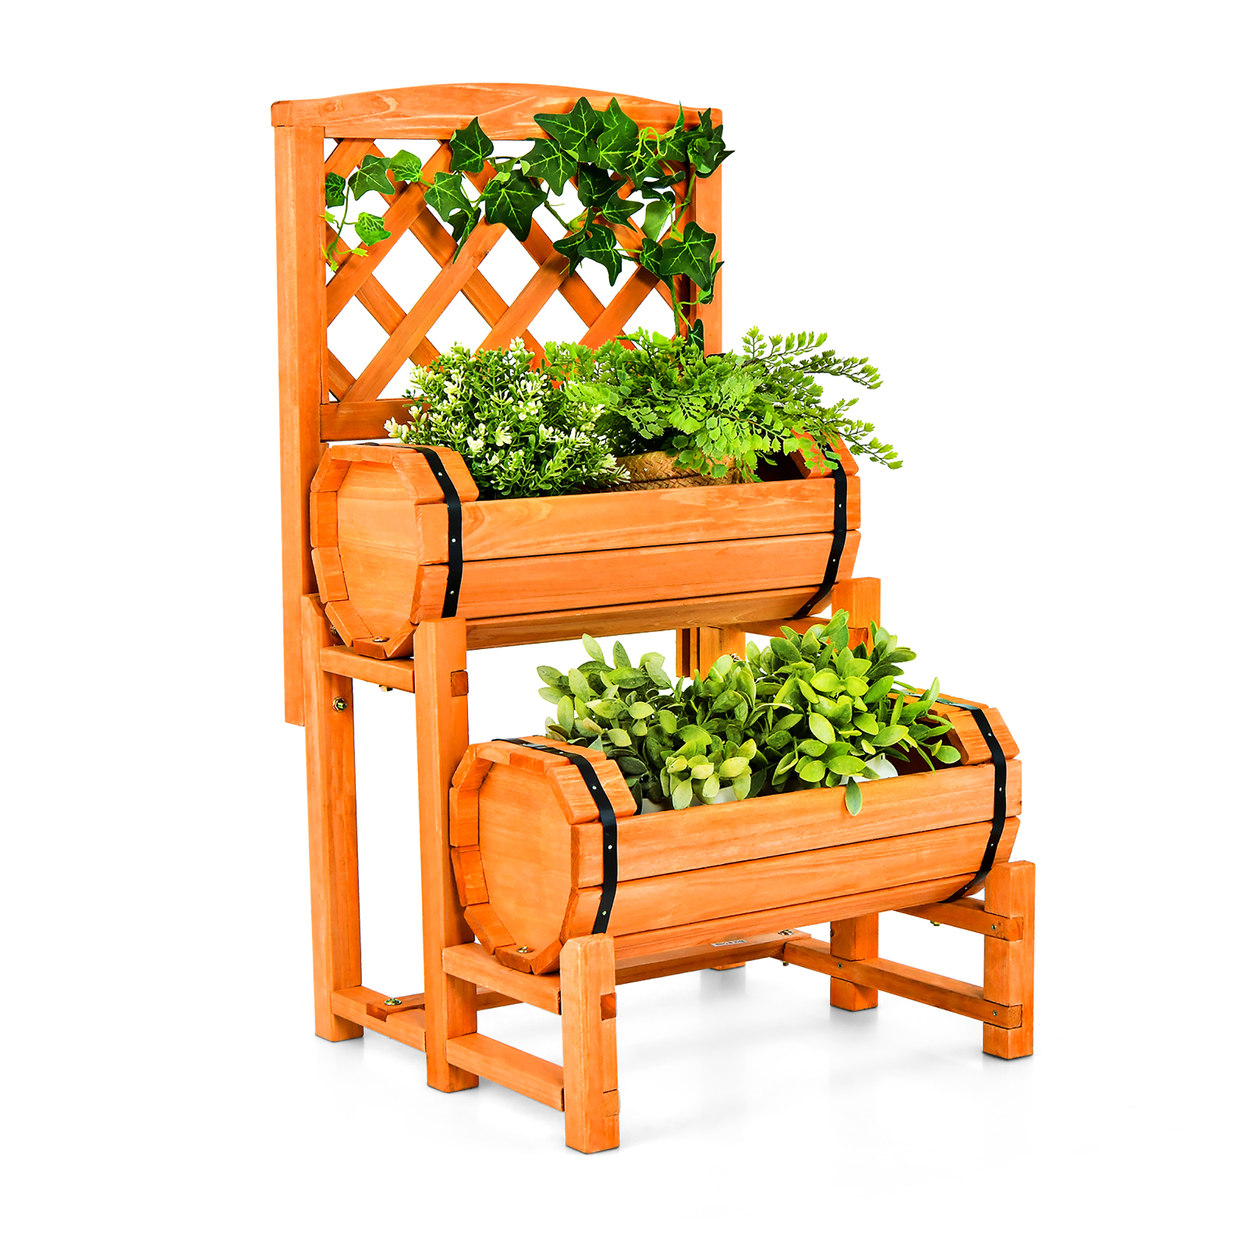 2-Tier Wooden Raised Garden Bed Container W/2 Cylindrical Planter Boxes & Trellis